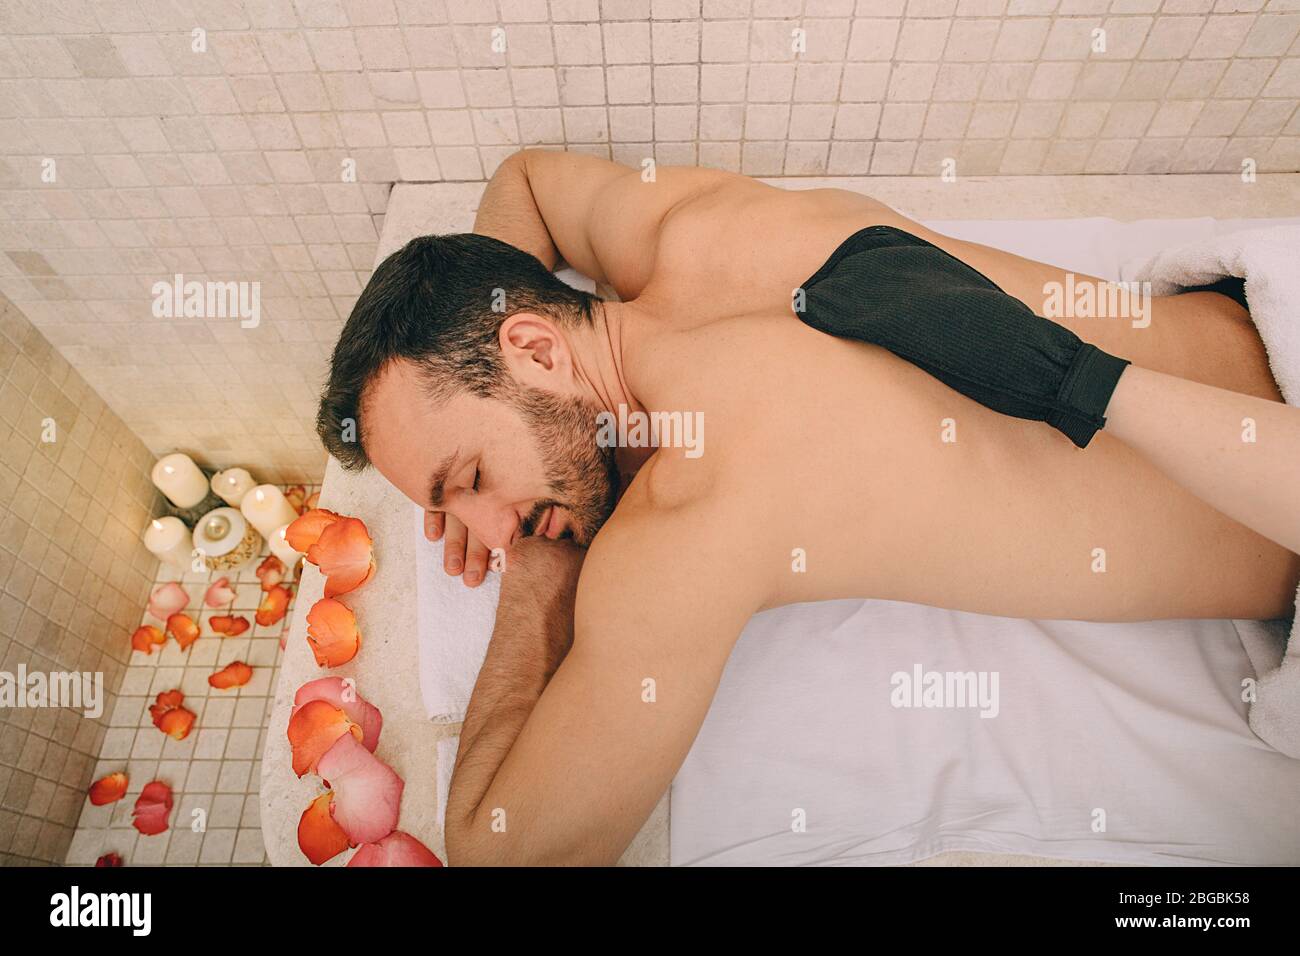 Handsome man relaxes on a marble massage table in a hammam. Hammam, Turkish bath, pilling Stock Photo